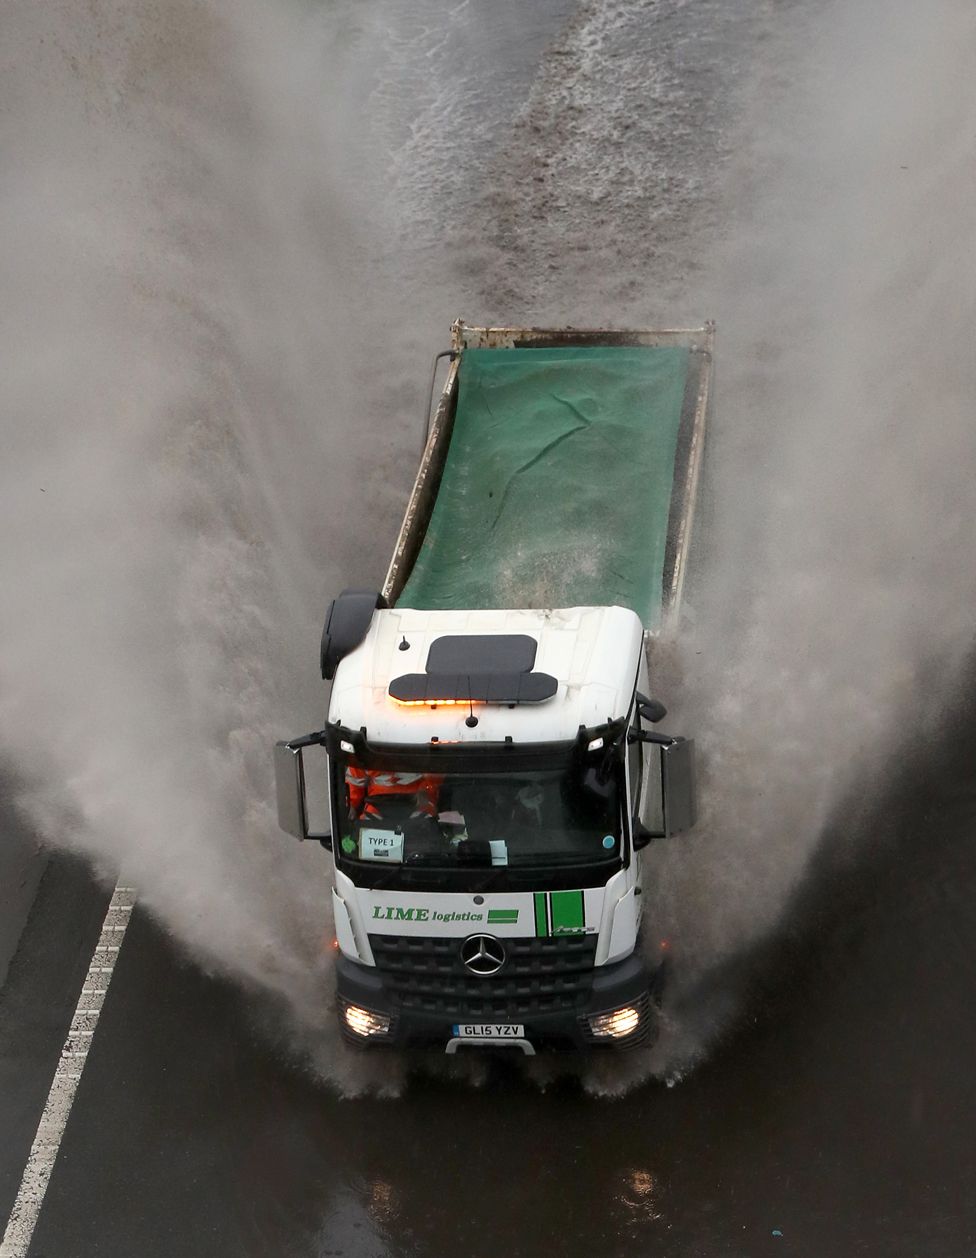 A lorry passes through a flooded road in Folkestone, Kent, on 14 January 2021